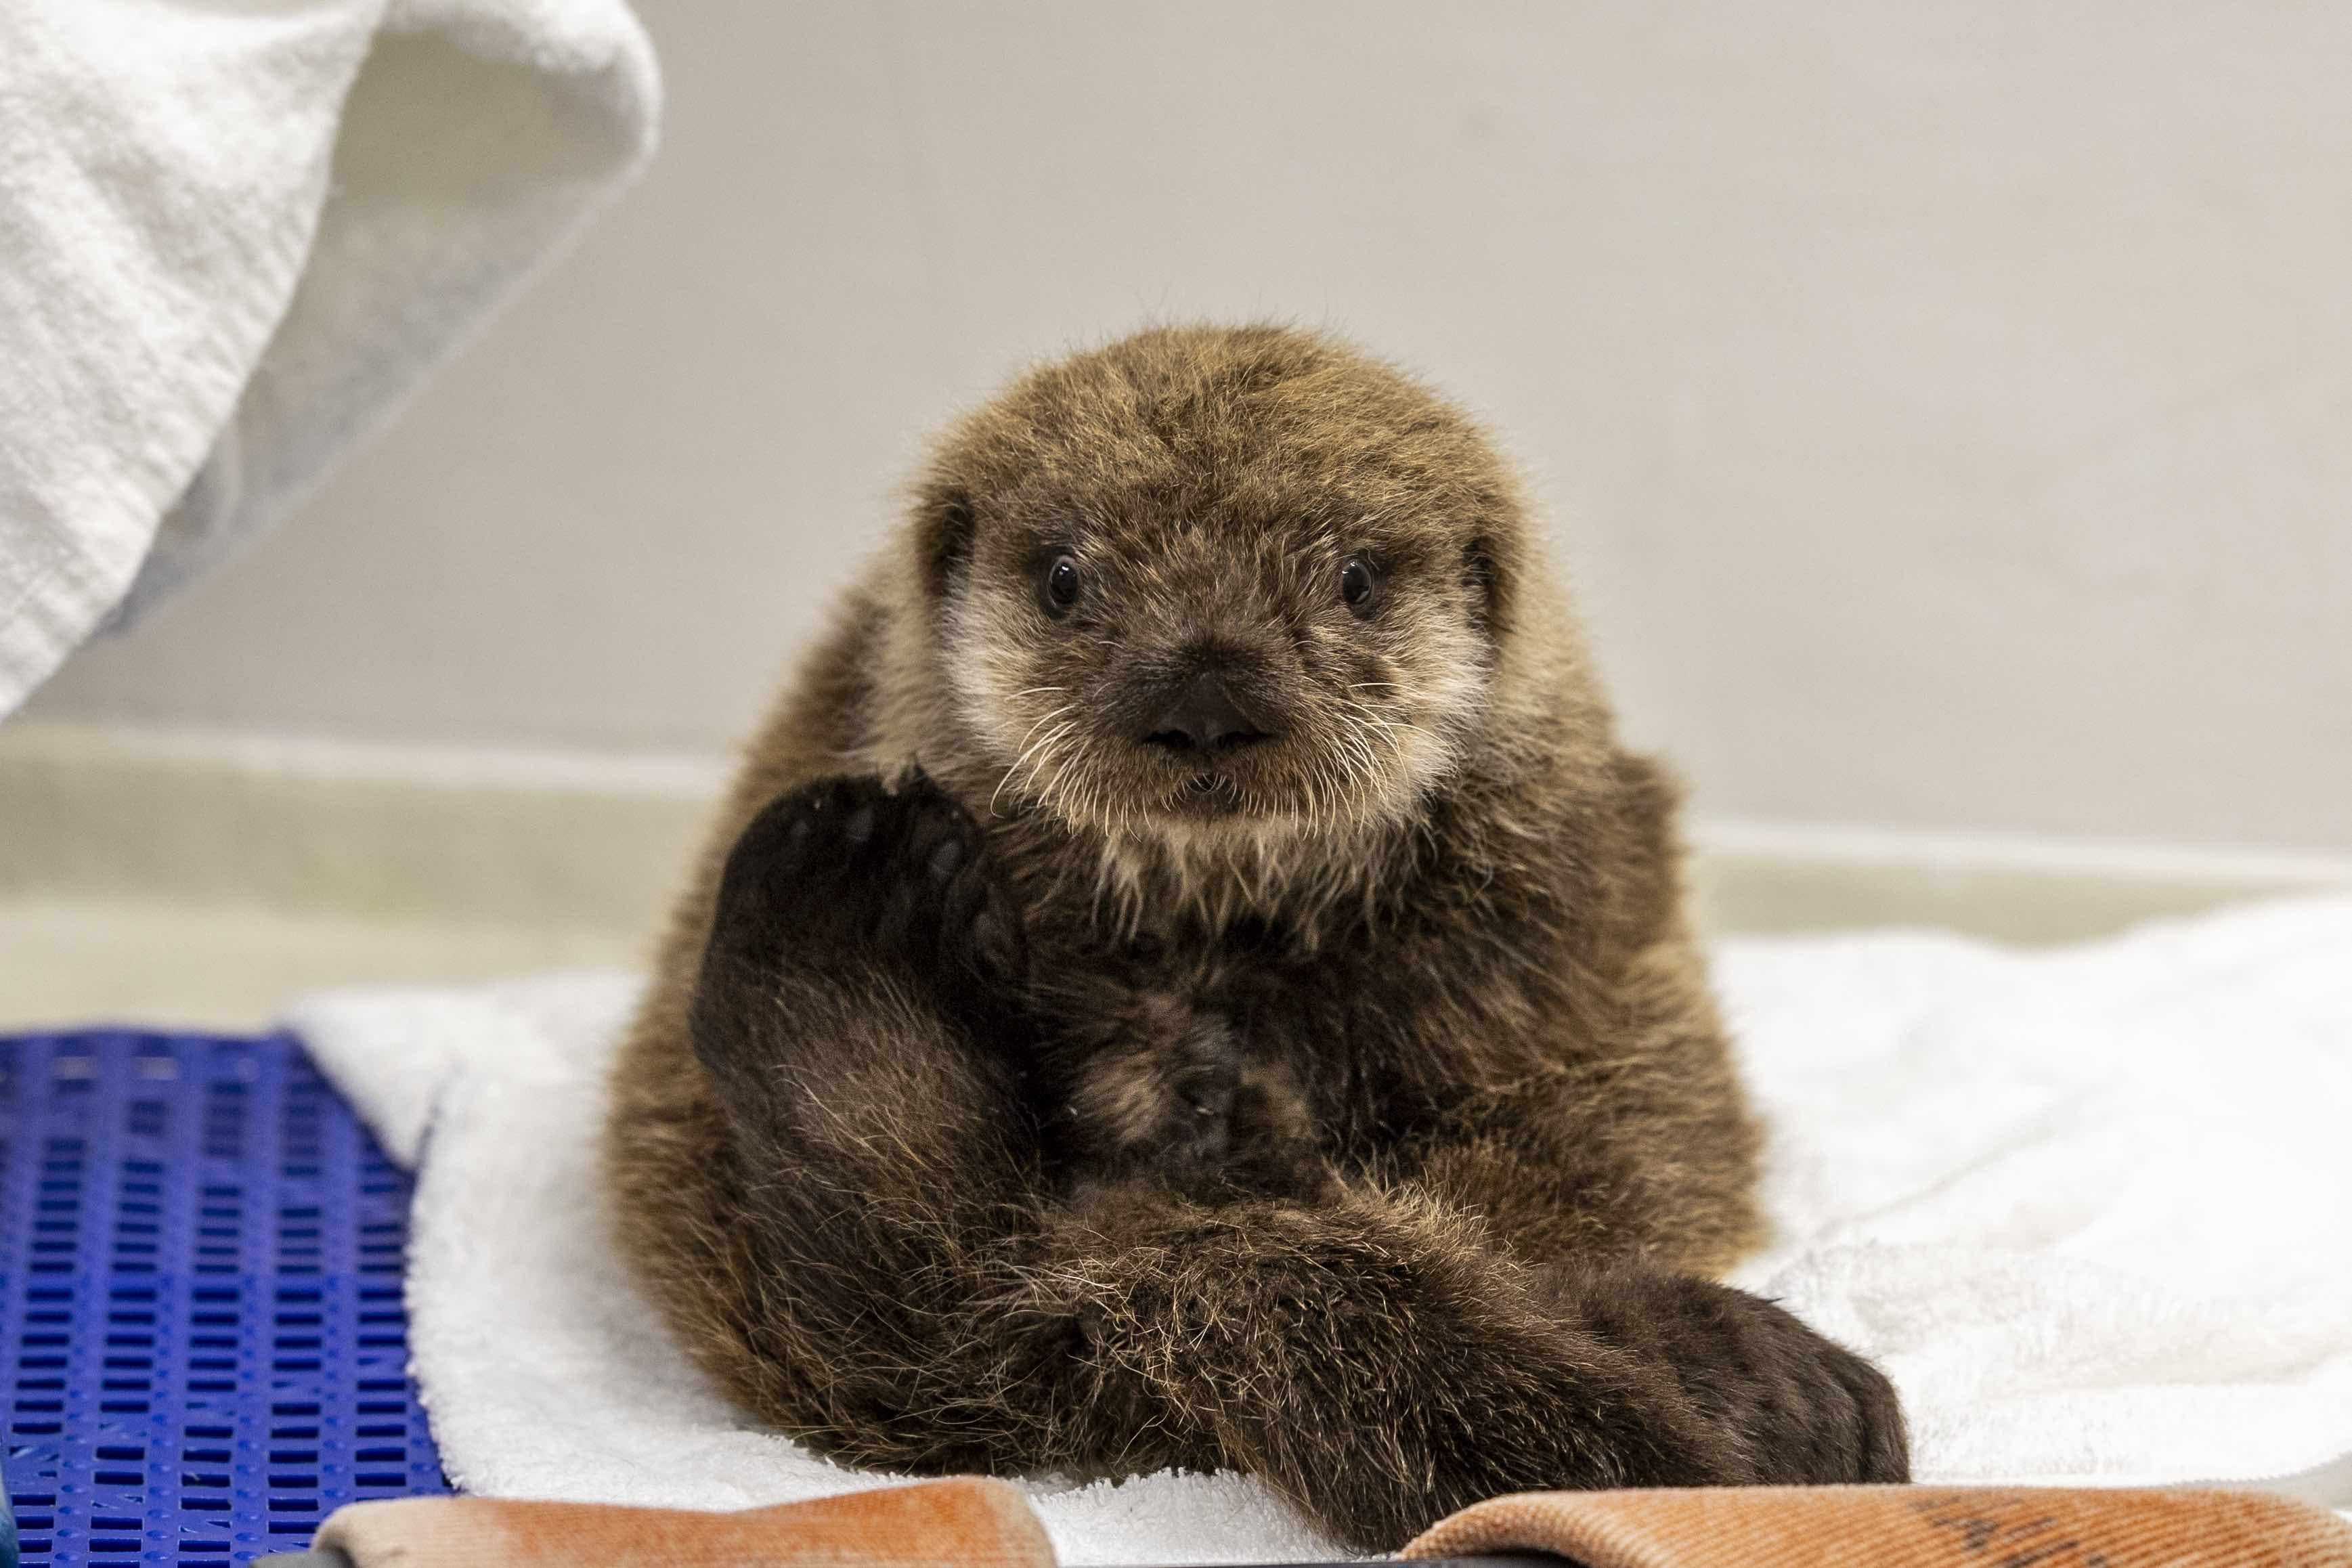 Pup EL2306 is ready for his closeup. He was originally treated for dehydration and malnutrition. (Heidi Zeiger / Shedd Aquarium)